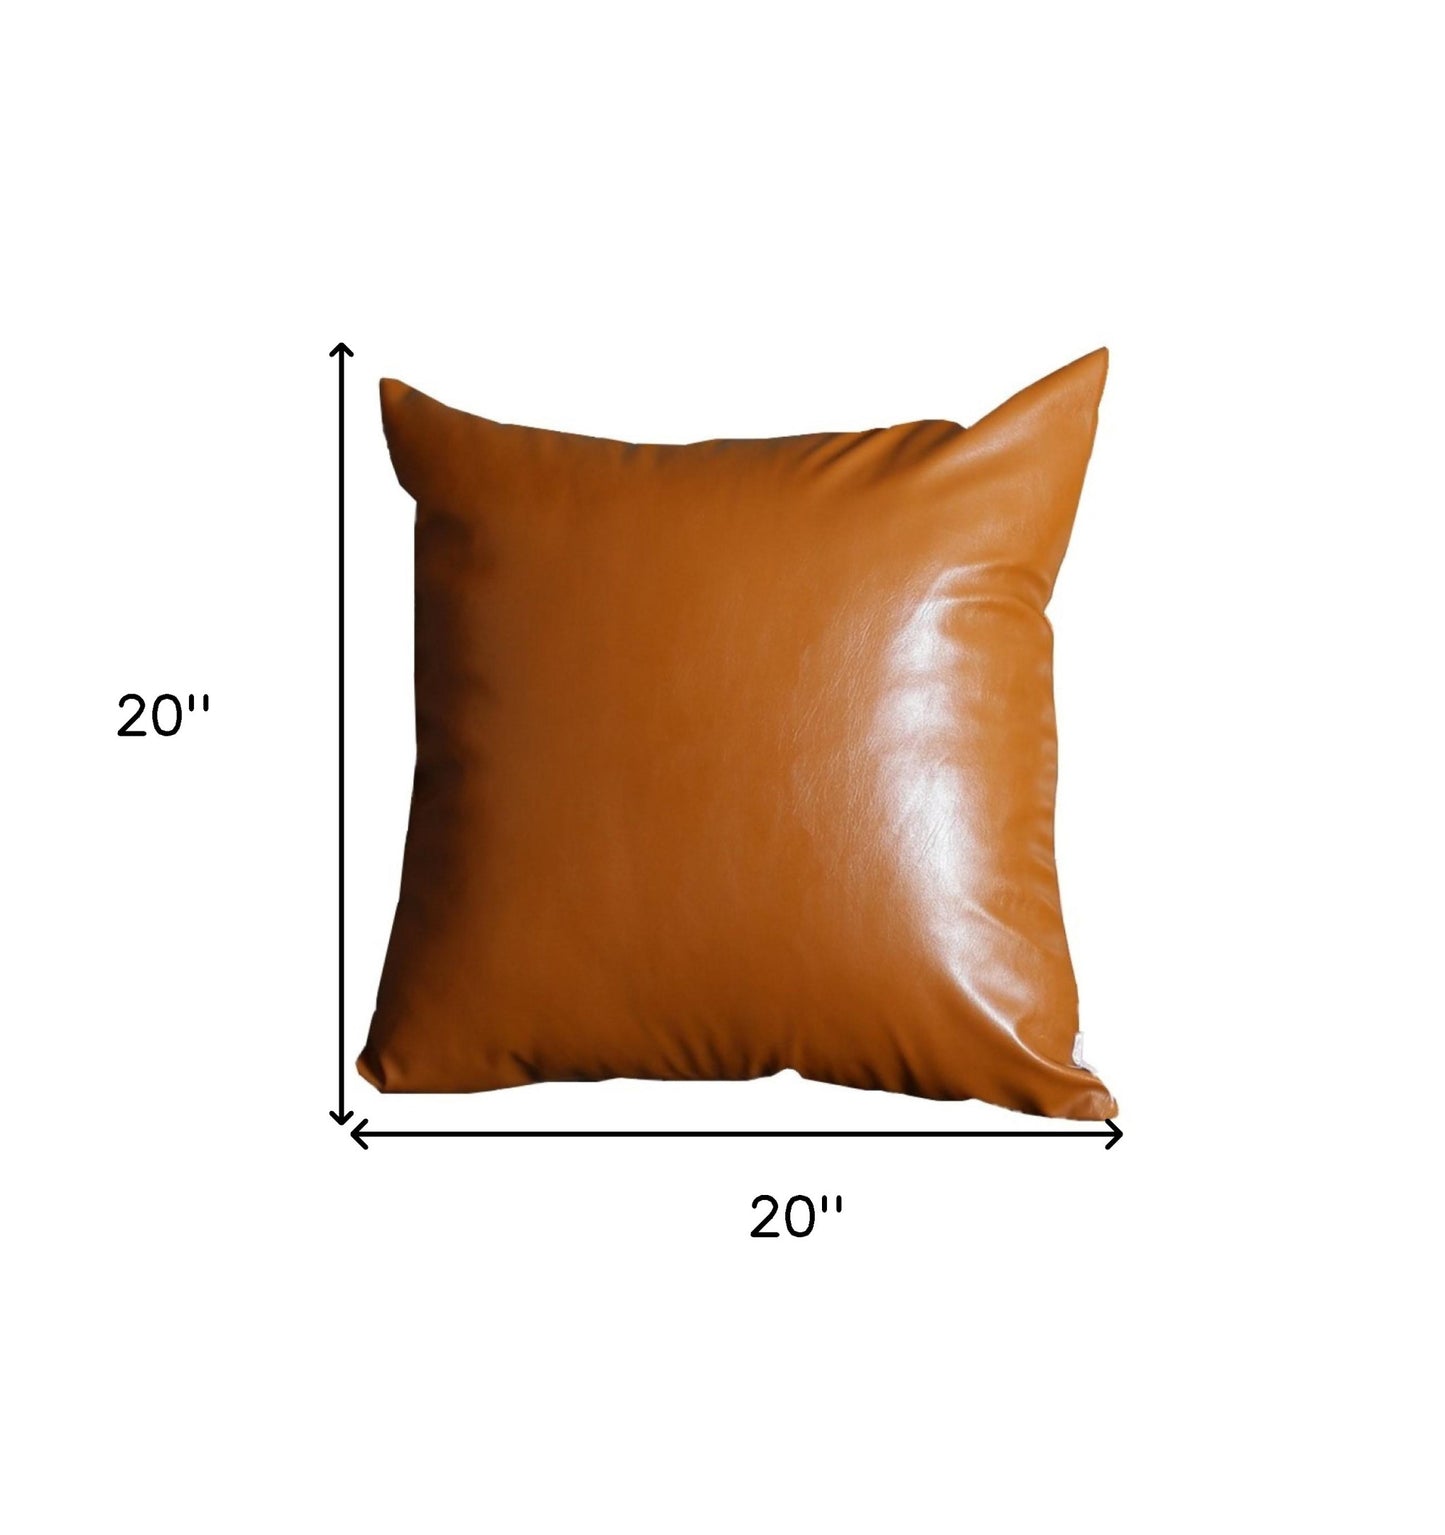 20" X 20" Solid Brown Faux Leather Decorative Pillow Cover